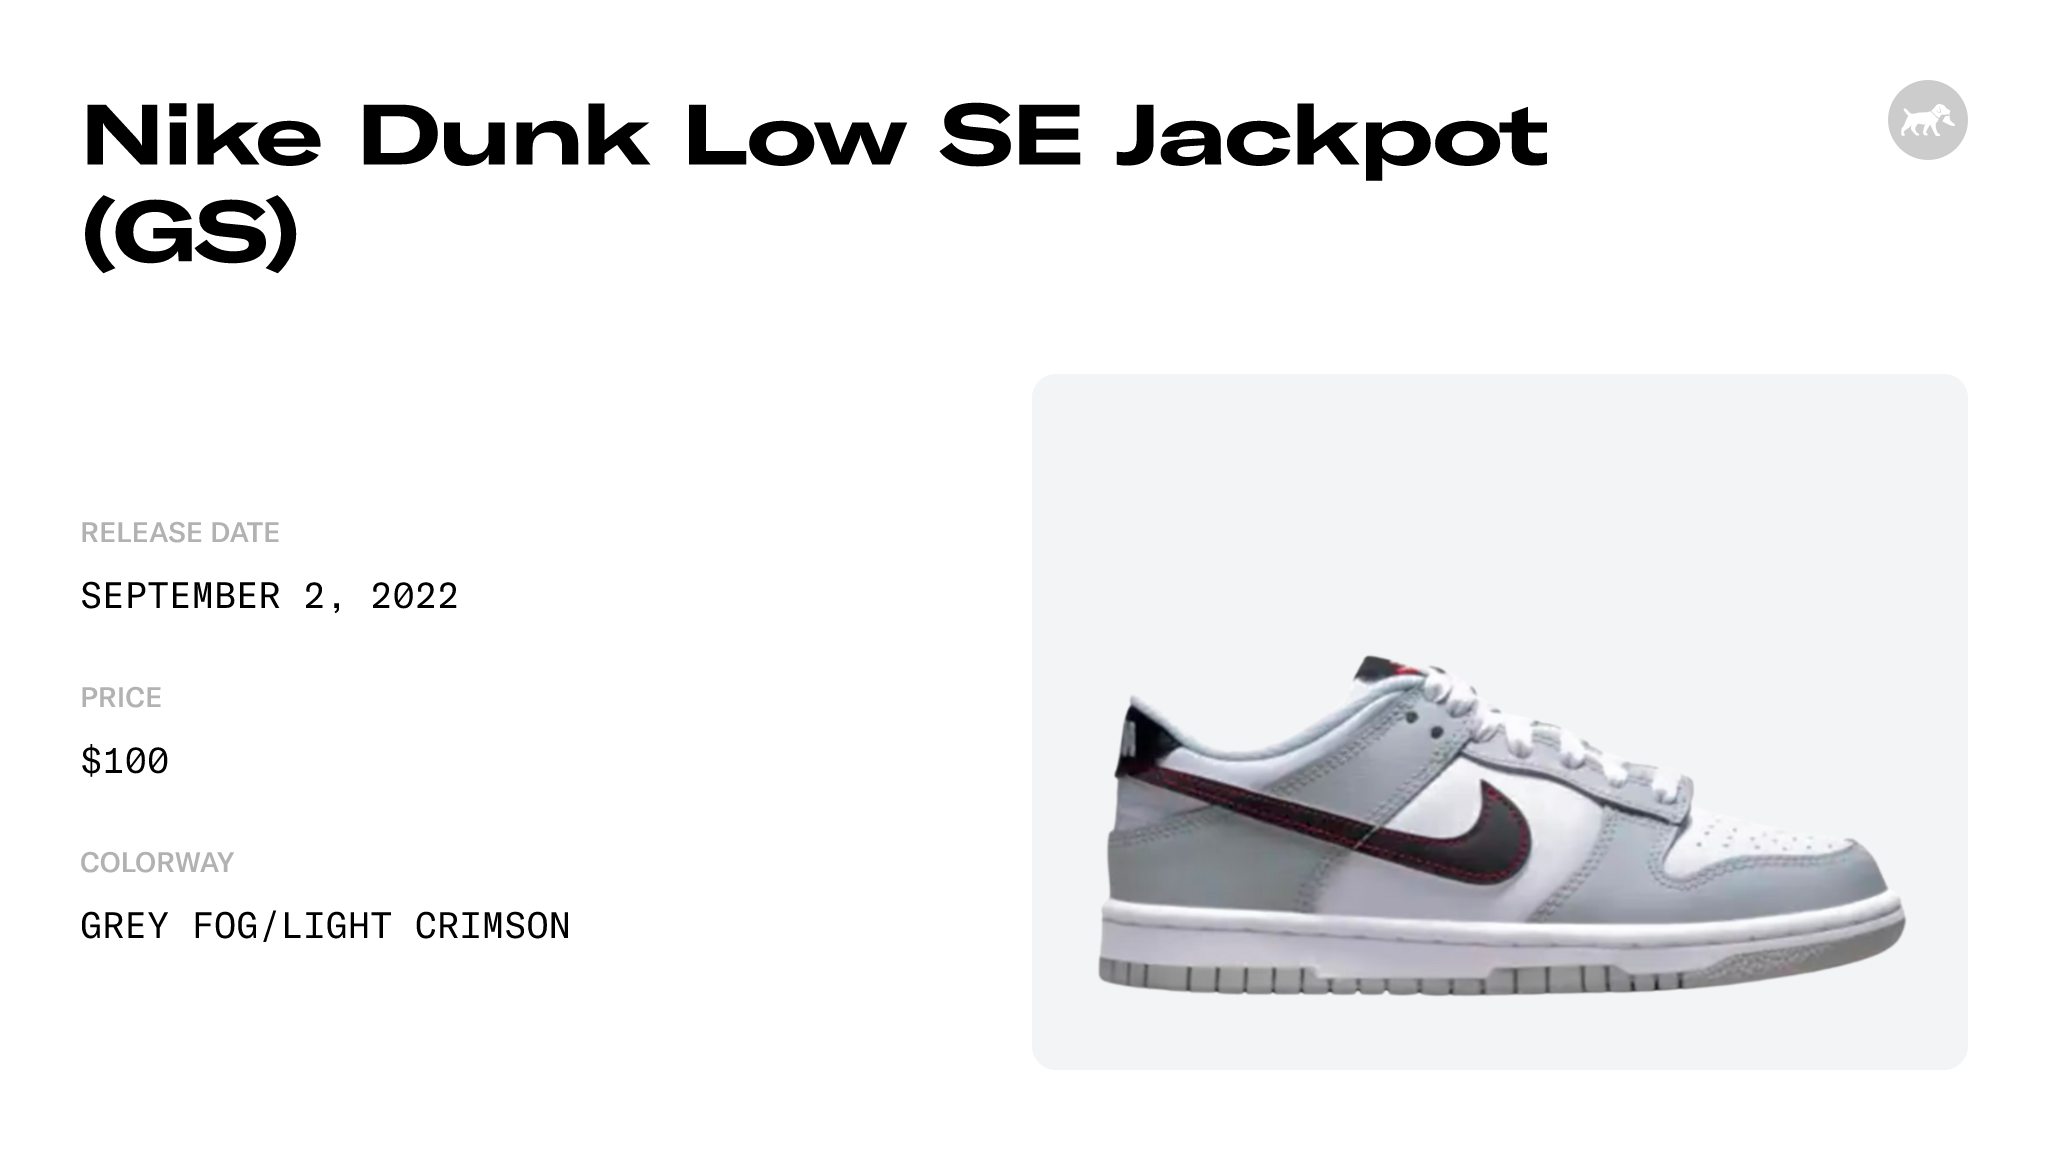 Nike Dunk Low SE Jackpot (GS) - DQ0380-001 Raffles and Release Date